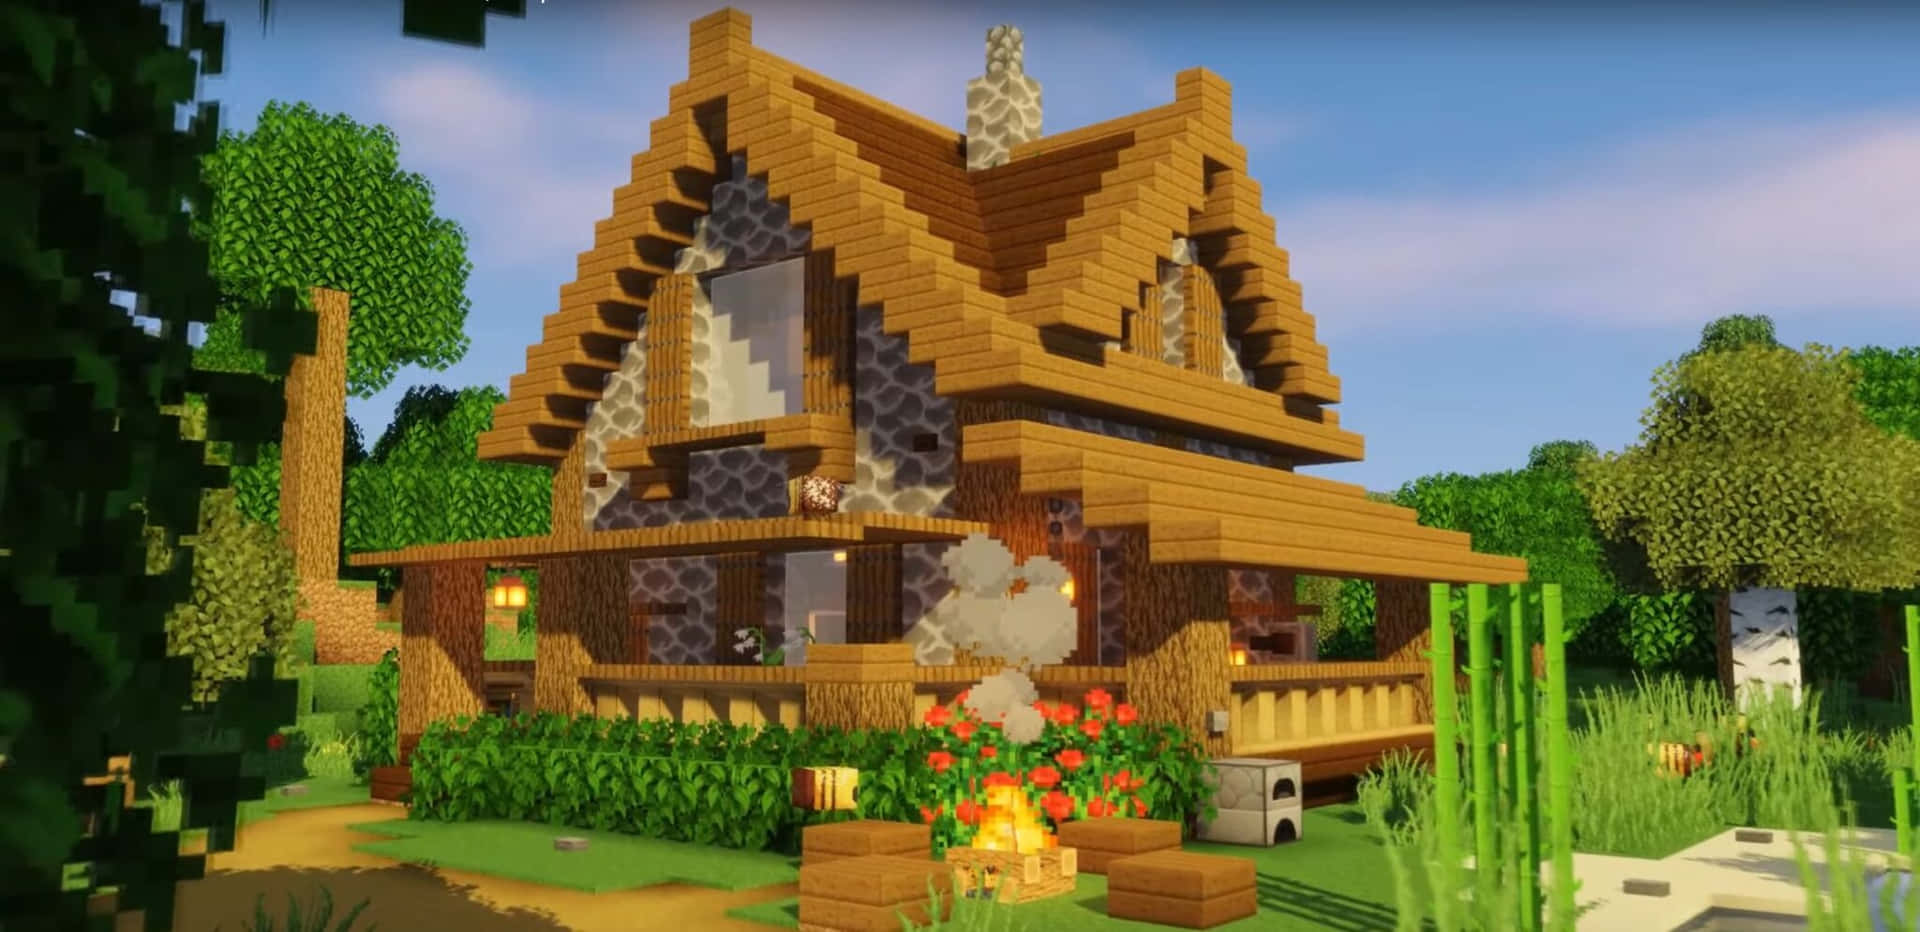 A spectacular view of a village of traditional Minecraft houses